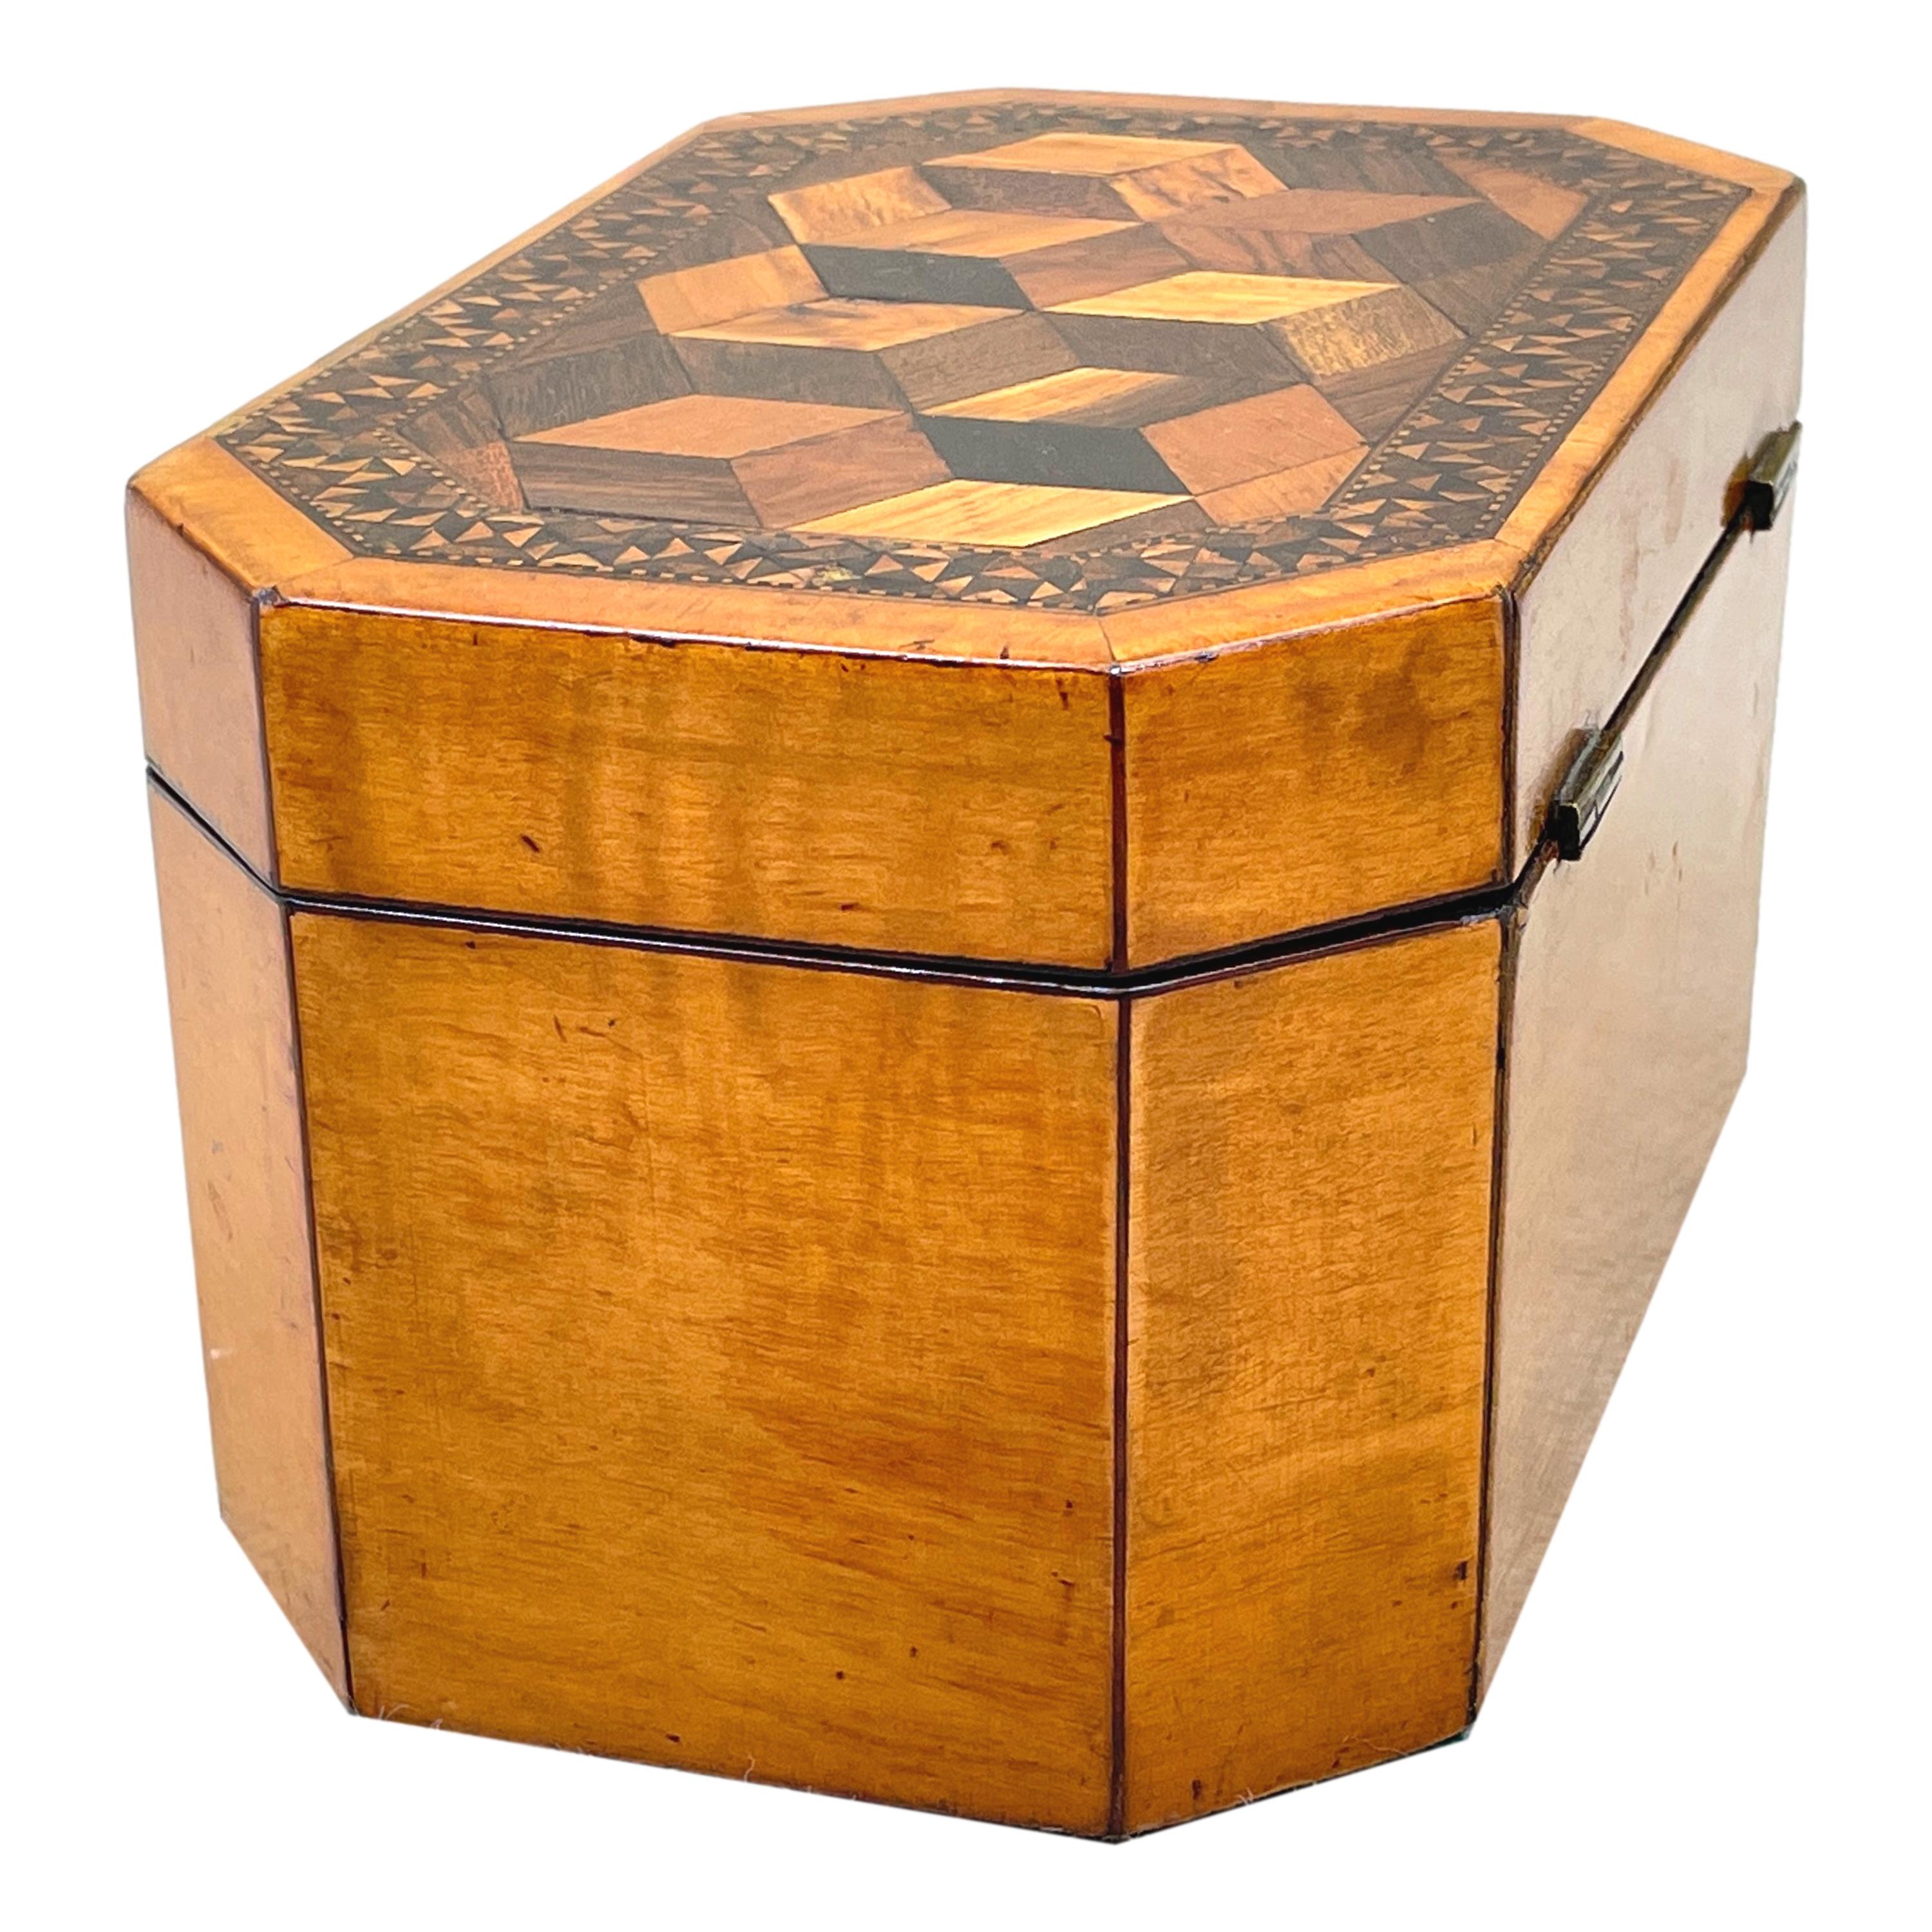 A very attractive George III period satinbirch wood tea caddy with elegant specimen wood parquetry inlaid decoration to top and further tunbridge ware inlaid decoration throughout having double lidded interior. 

This is a lovely, attractive